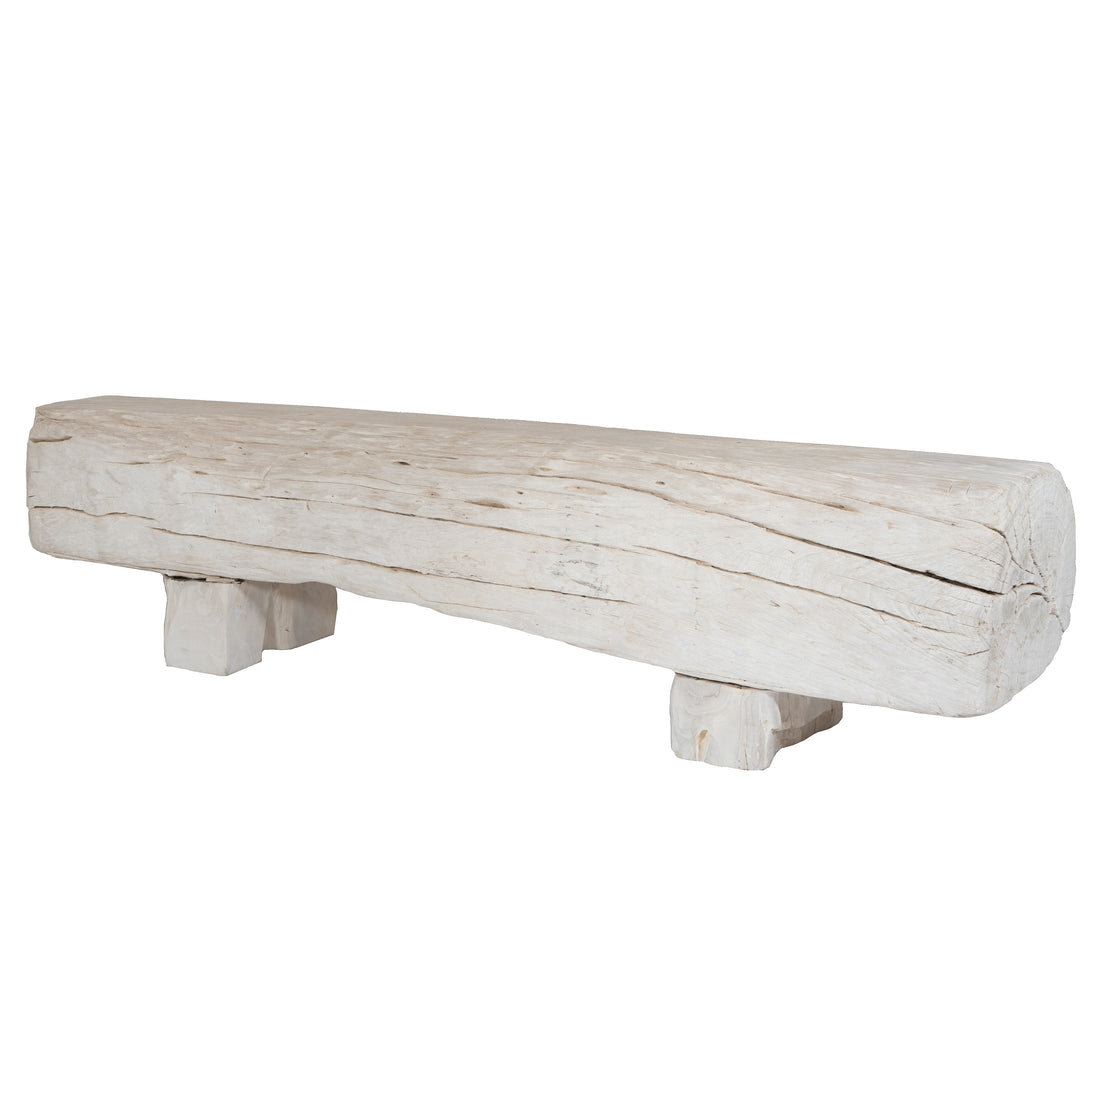 BLEACHED LESUNG BENCH